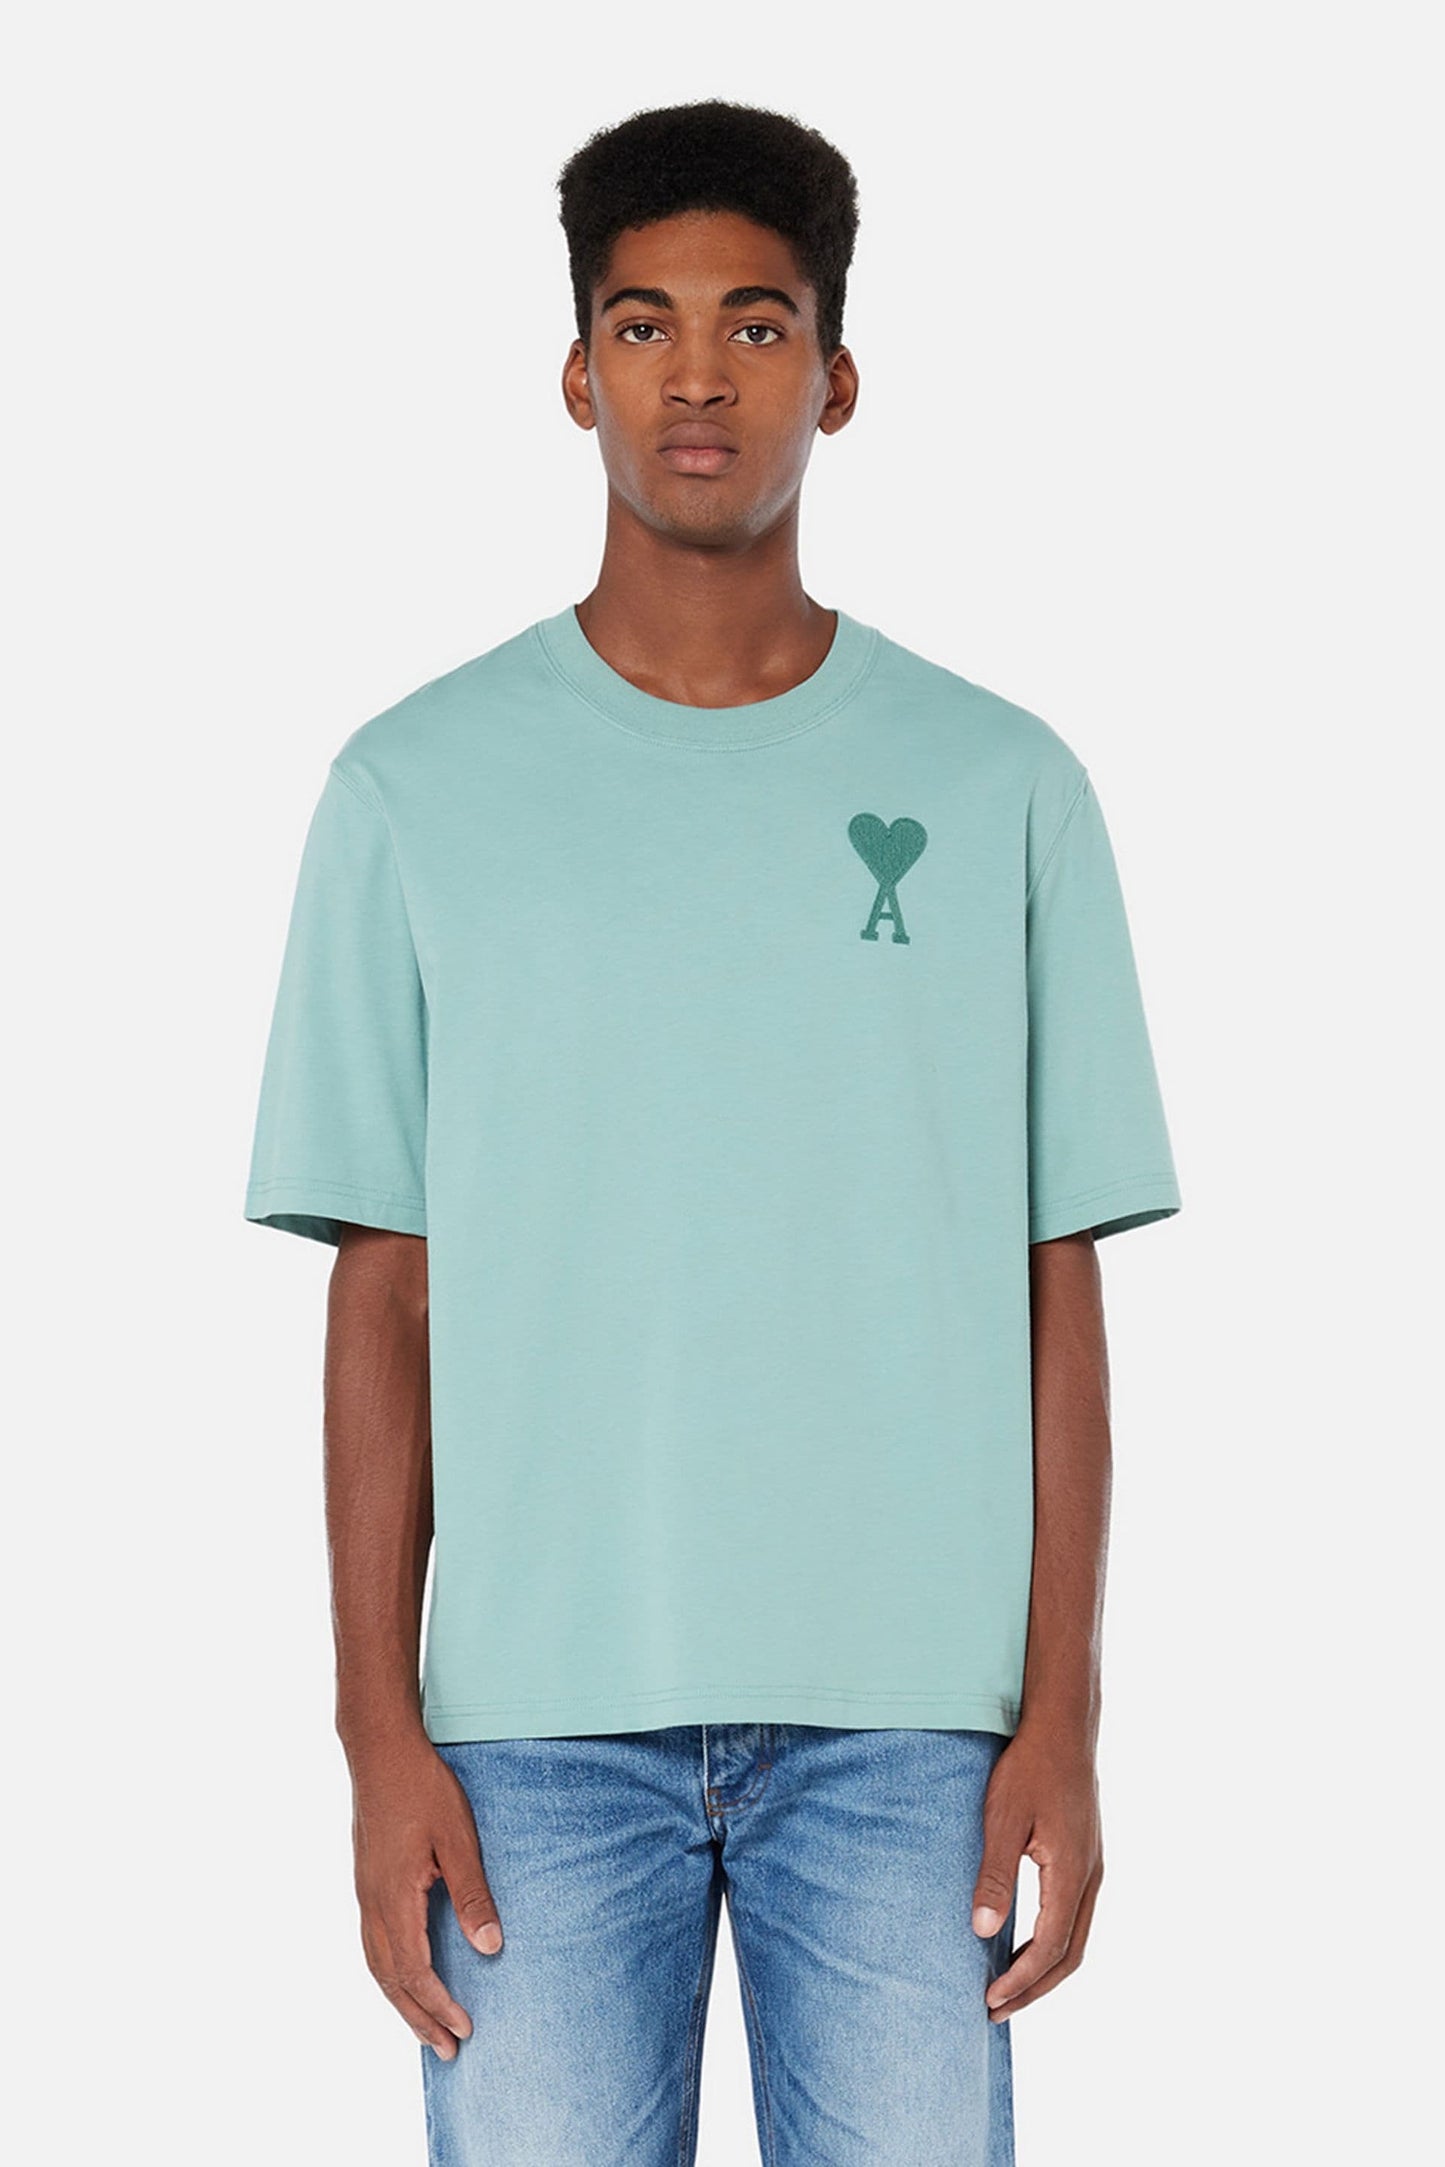 AMI Alexandre Embroidered Logo Turquoise